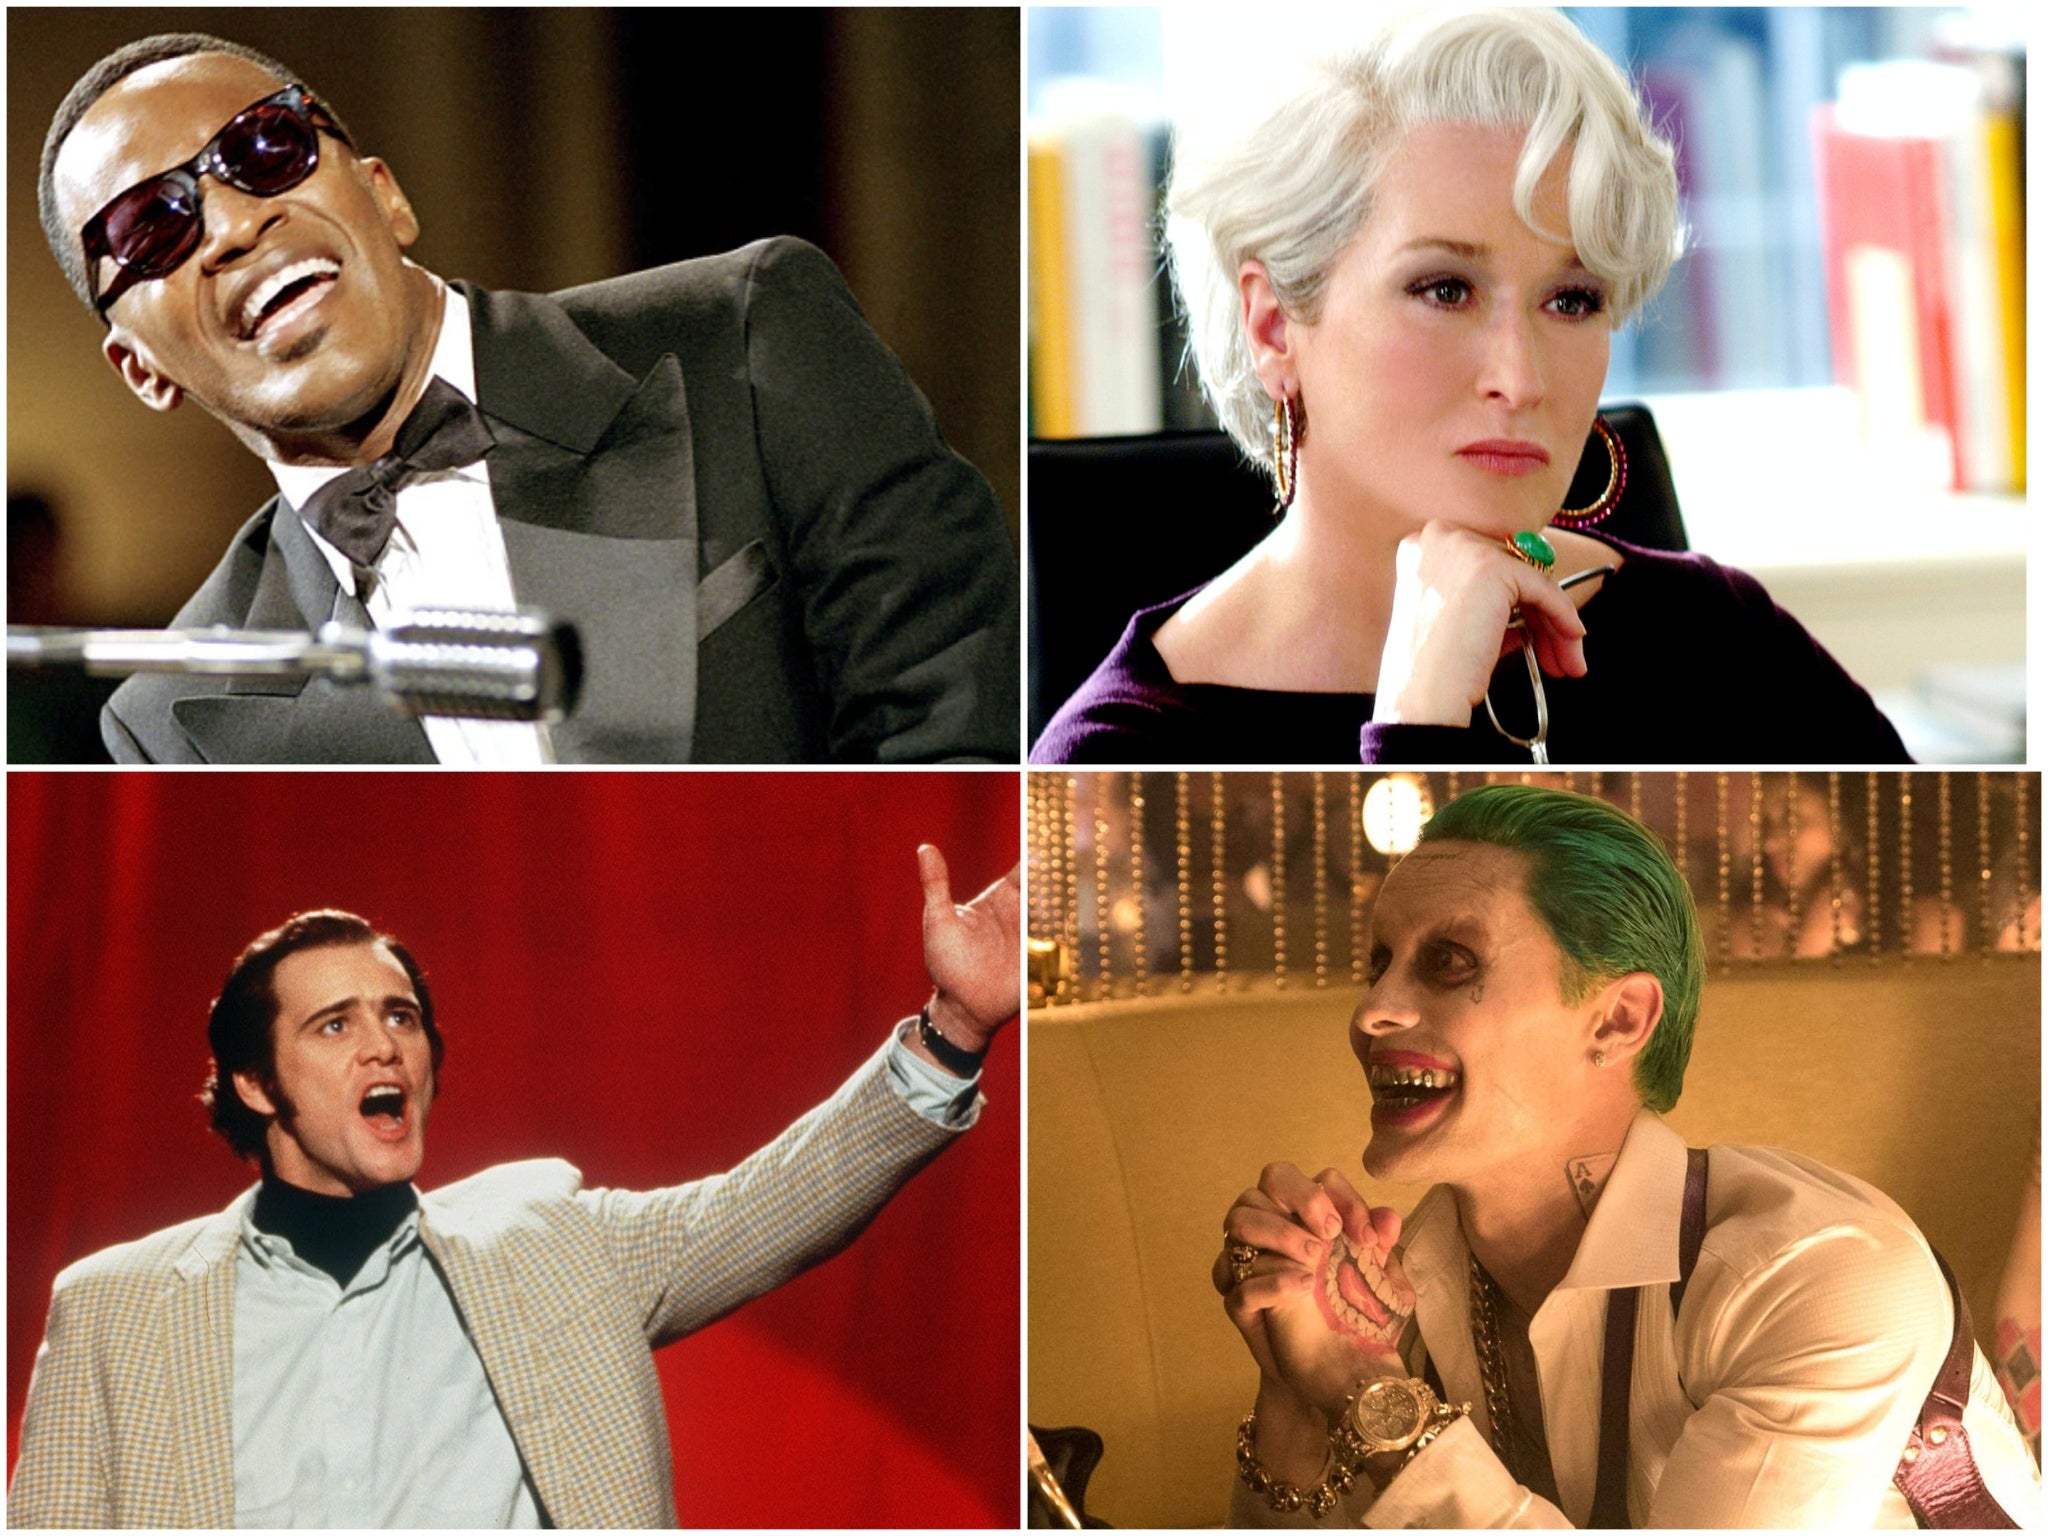 Jamie Foxx in ‘Ray’, Meryl Streep in ‘The Devil Wears Prada’, Jim Carrey in ‘Man on the Moon’ and Jared Leto in ‘Suicide Squad'